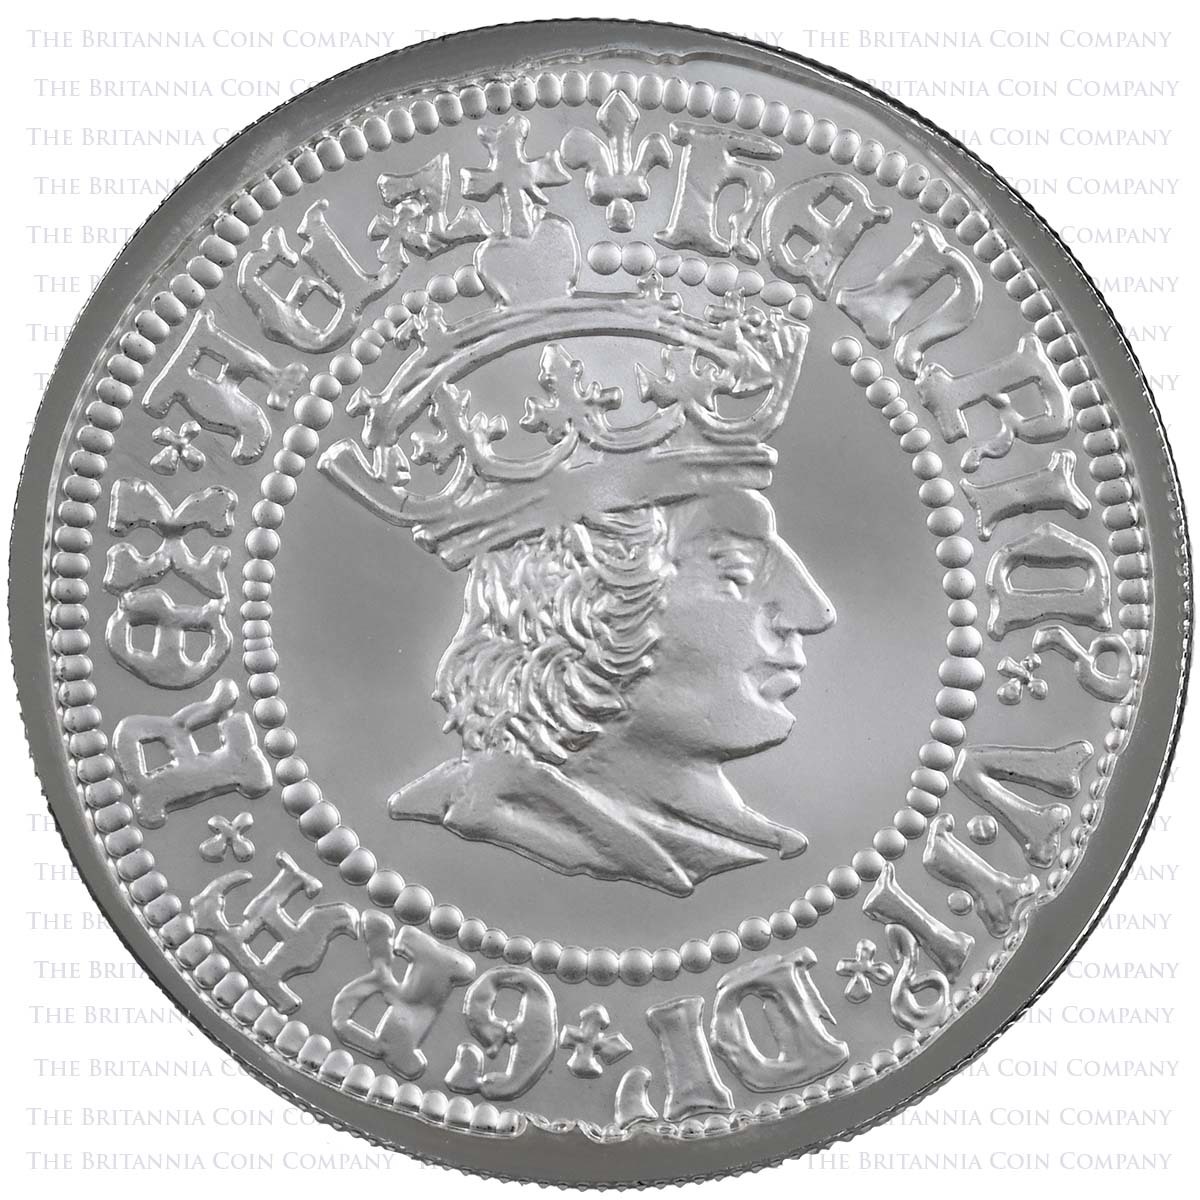 UK22H7S20 2022 British Monarchs Henry VII 2 Ounce Silver Proof Reverse